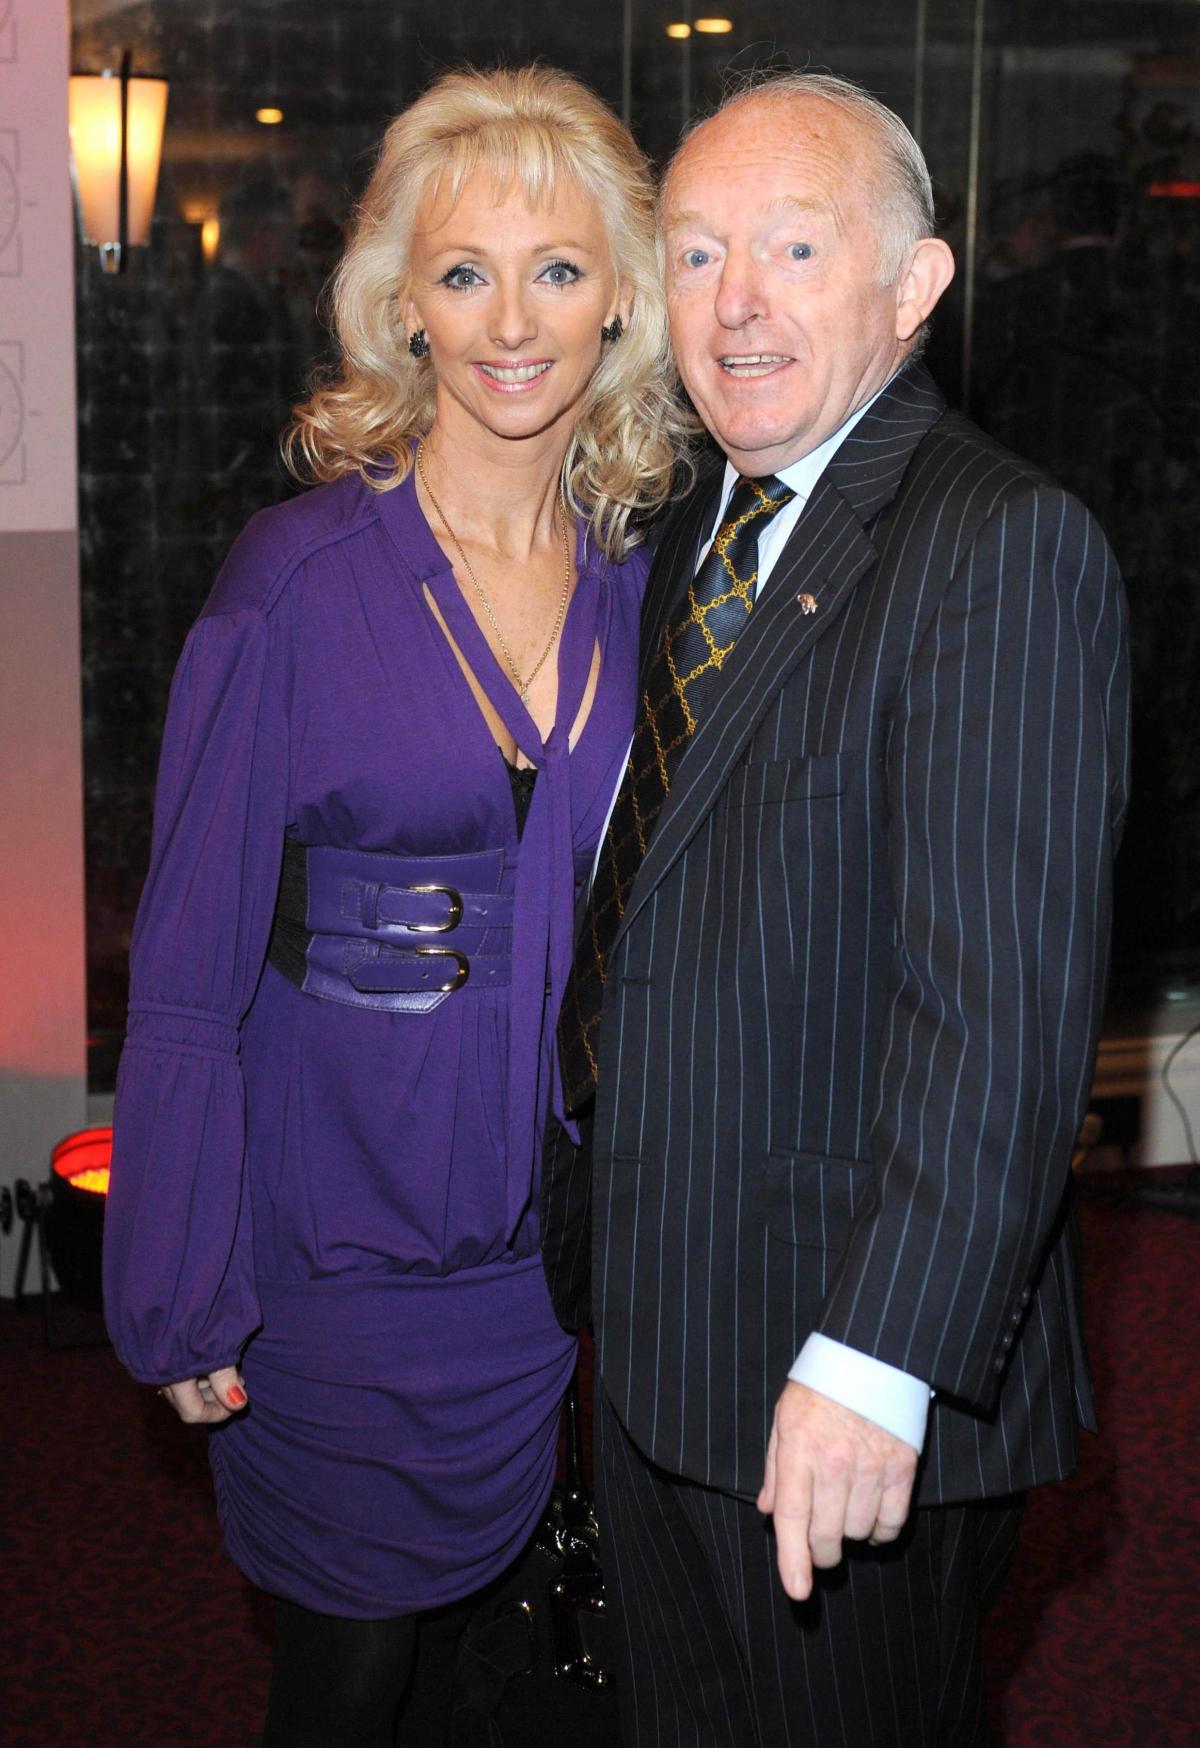 Photos remembering the life of TV star and magician Paul Daniels who has died aged 77